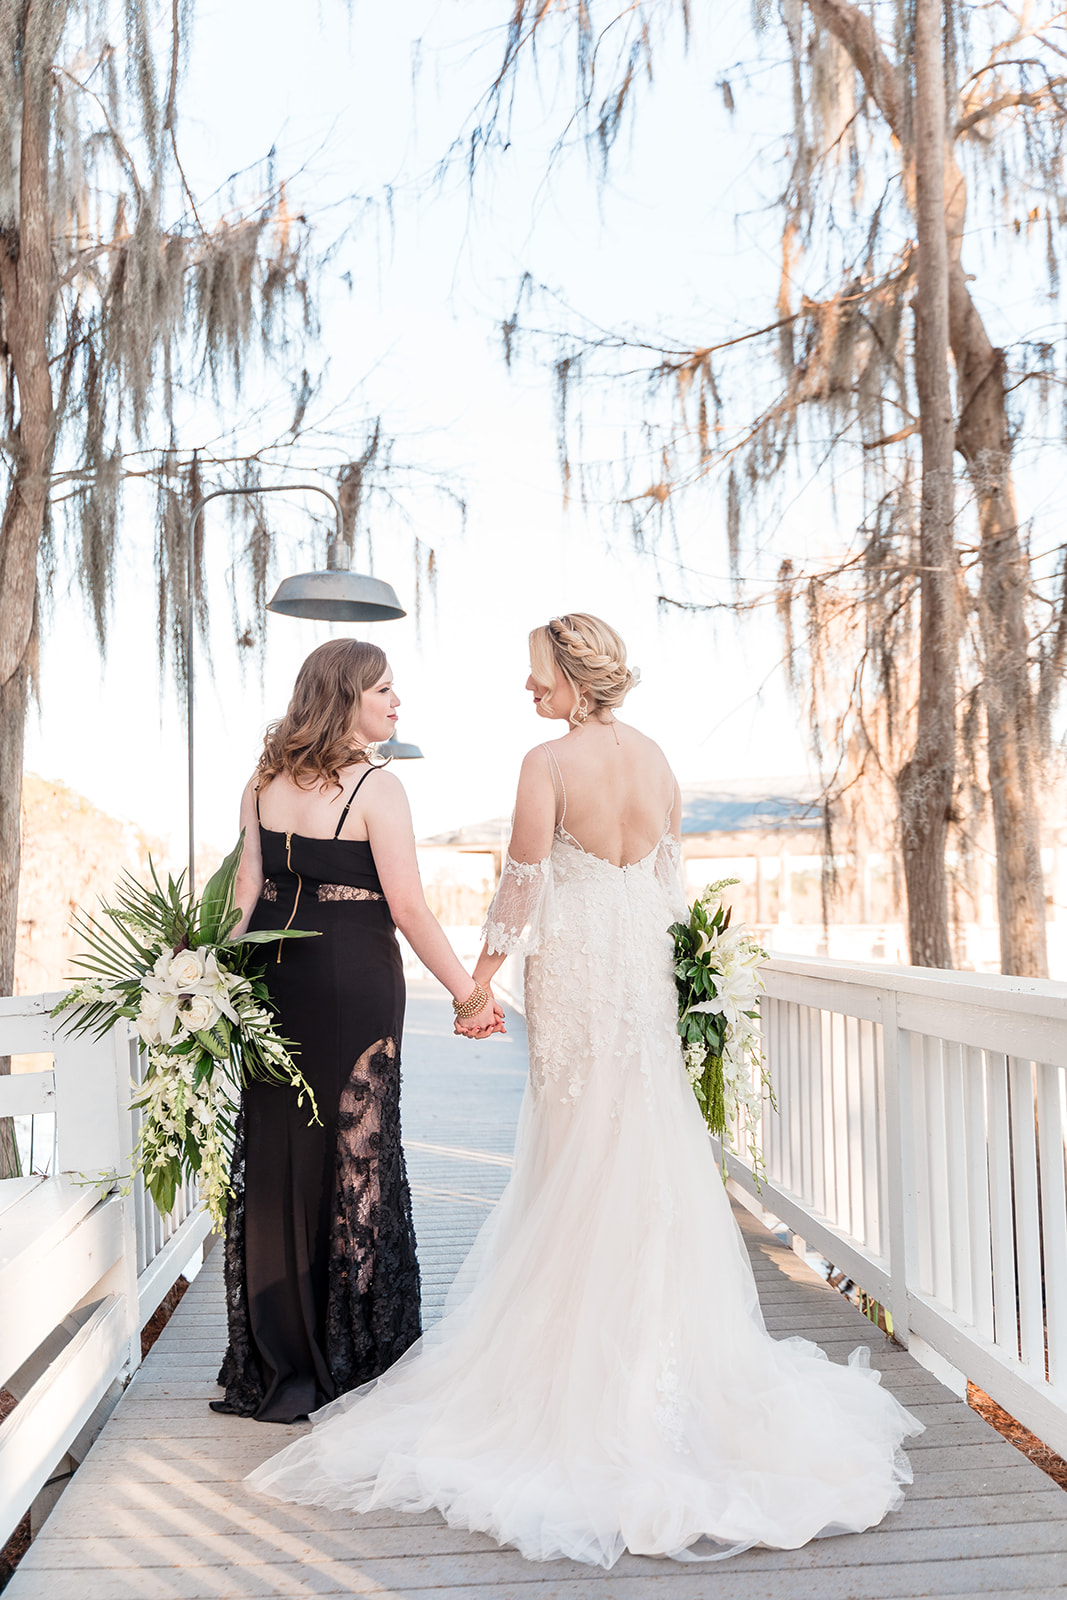 Two brides holding hands on a bridge, one in a black dress and the other in a white dress, symbolizing their union in love and harmony.